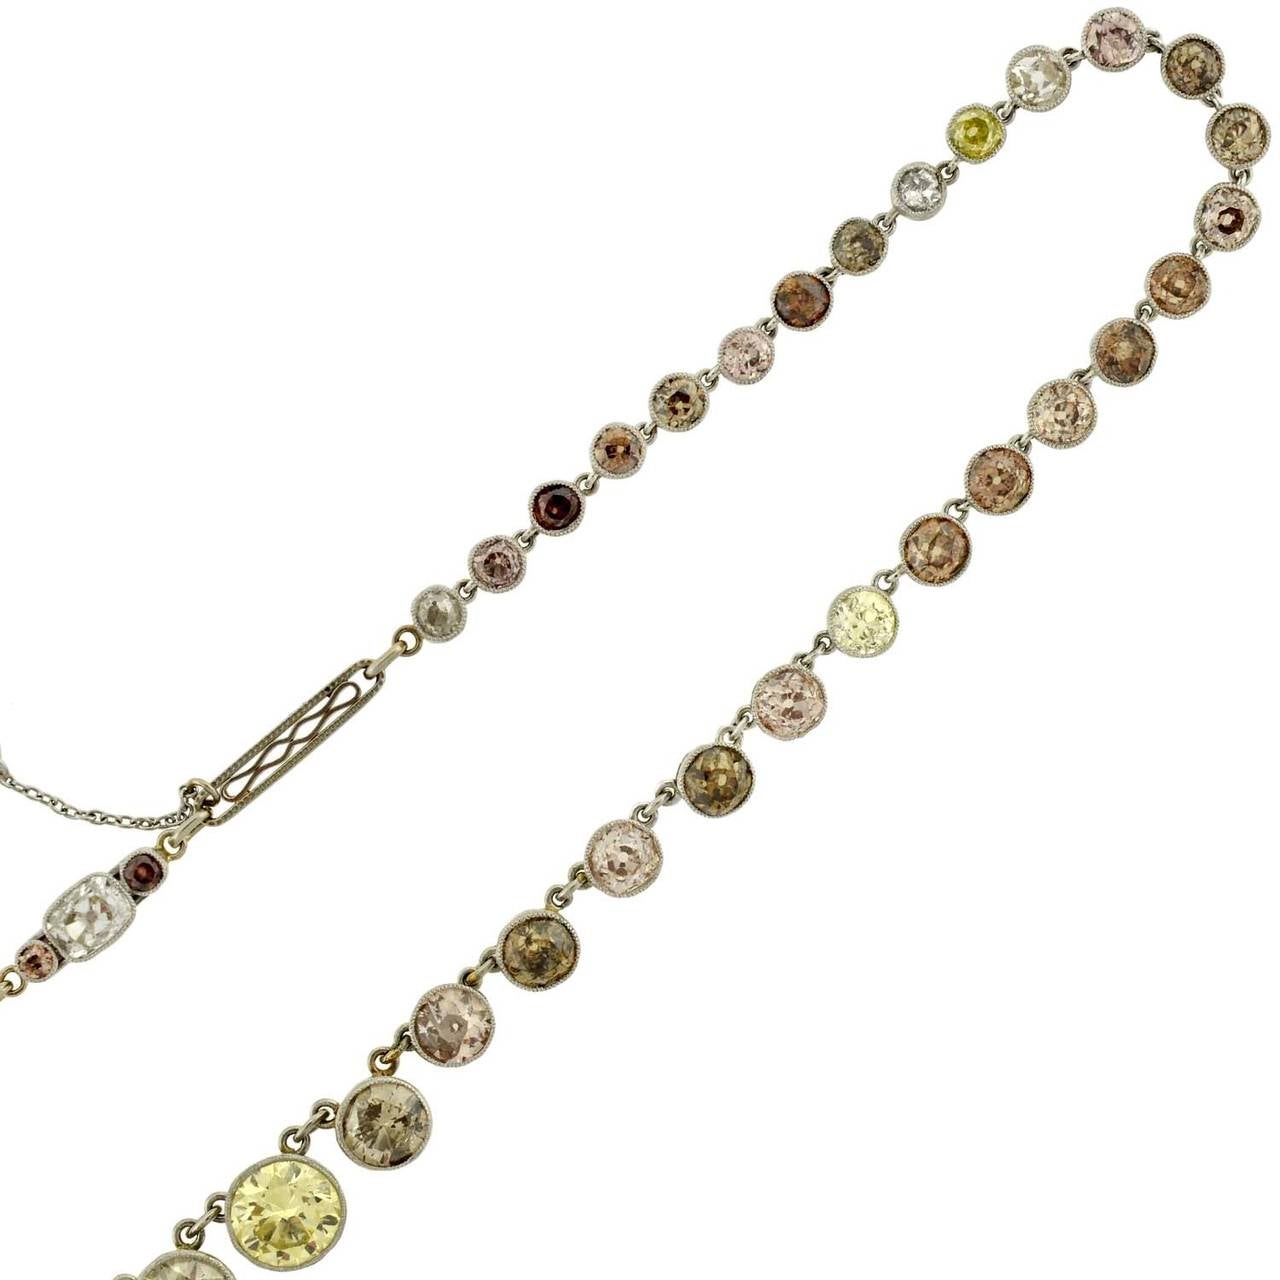 An exquisite and very unusual Edwardian multi-colored Riviera diamond necklace! Made of platinum, this stunning piece has 55 graduating old European Cut diamond stones which are set within a milgrained bezel setting. The stones are absolutely